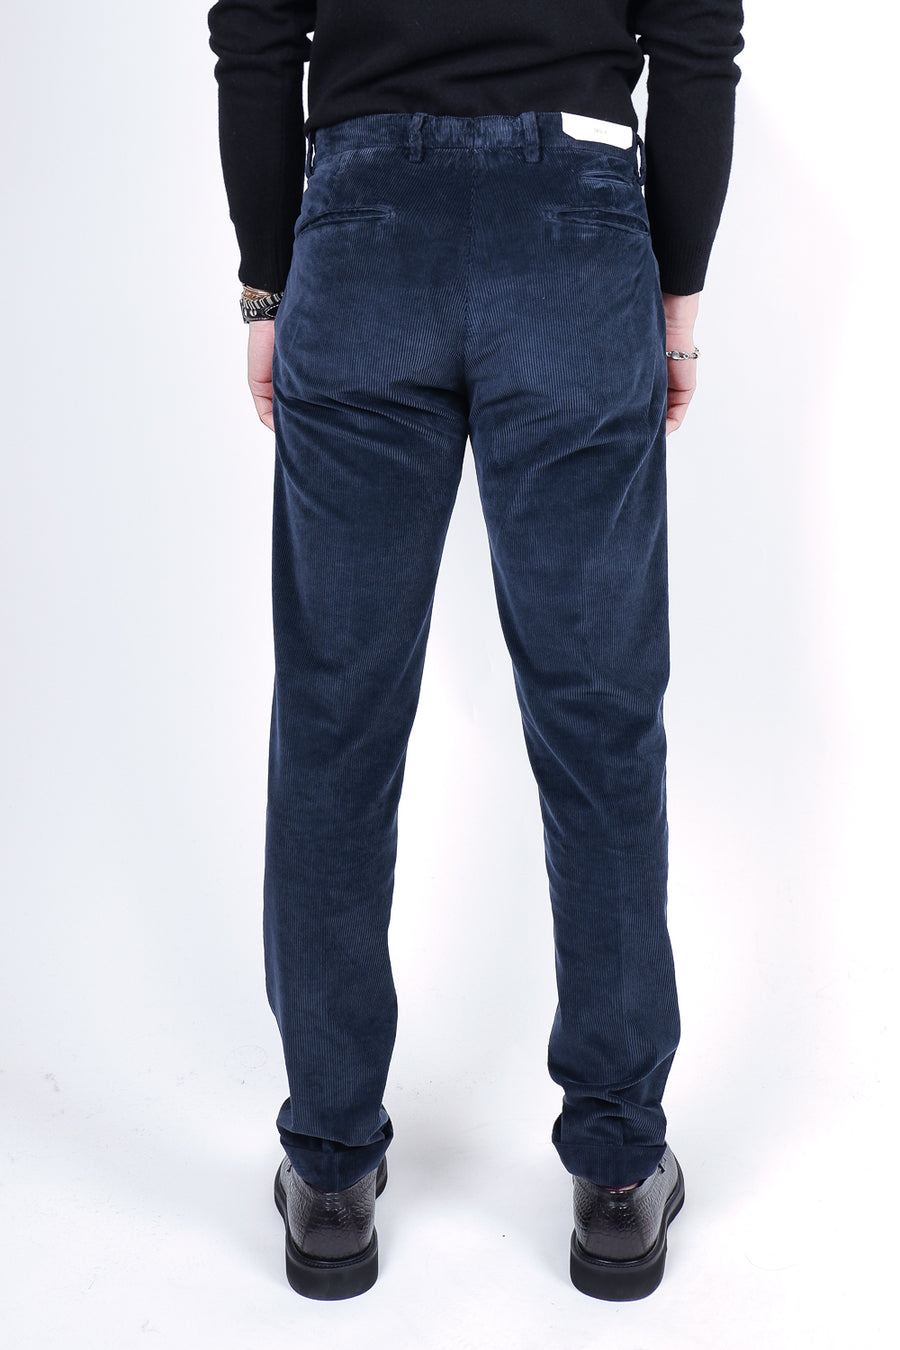 Buy the Briglia Italian Corduroy Trouser Navy at Intro. Spend £50 for free UK delivery. Official stockists. We ship worldwide.